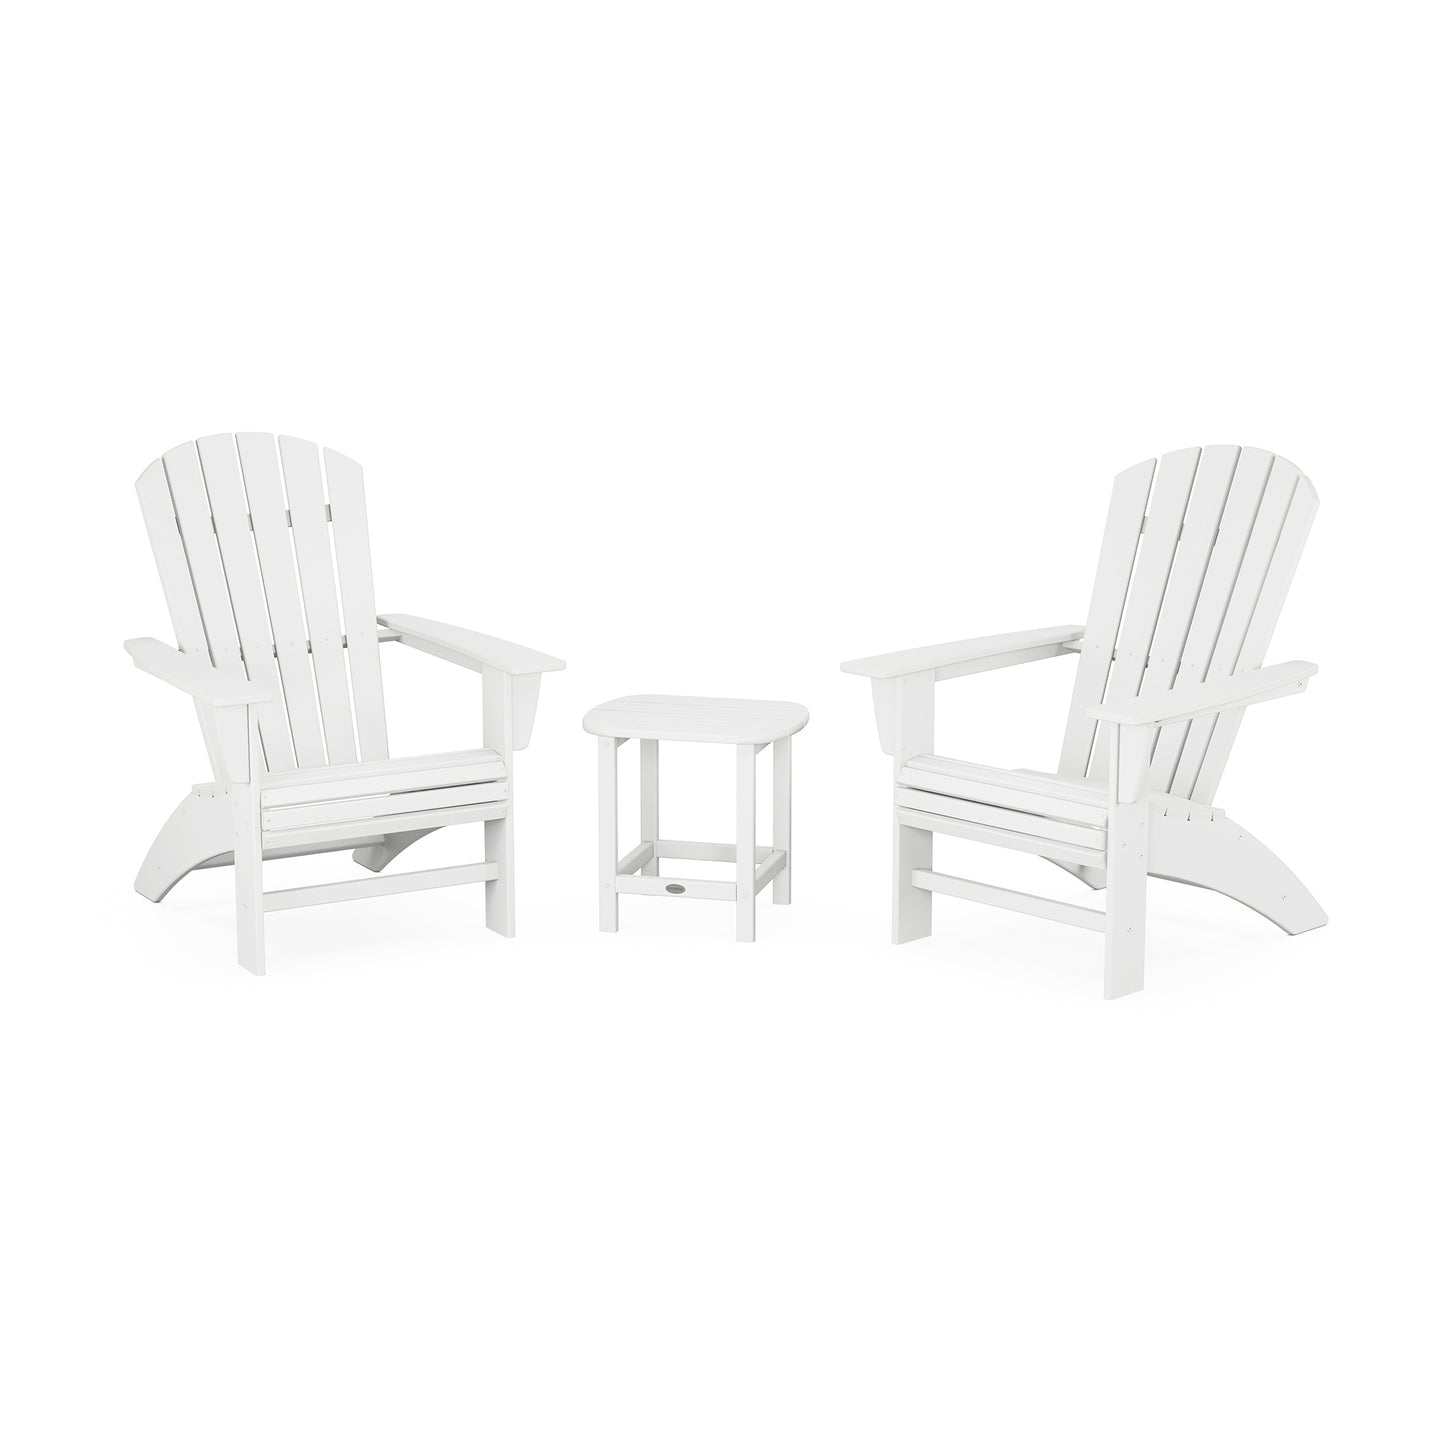 Two white POLYWOOD® Nautical 3-Piece Curveback Adirondack sets facing each other with a small matching table in between, set against a plain white background.